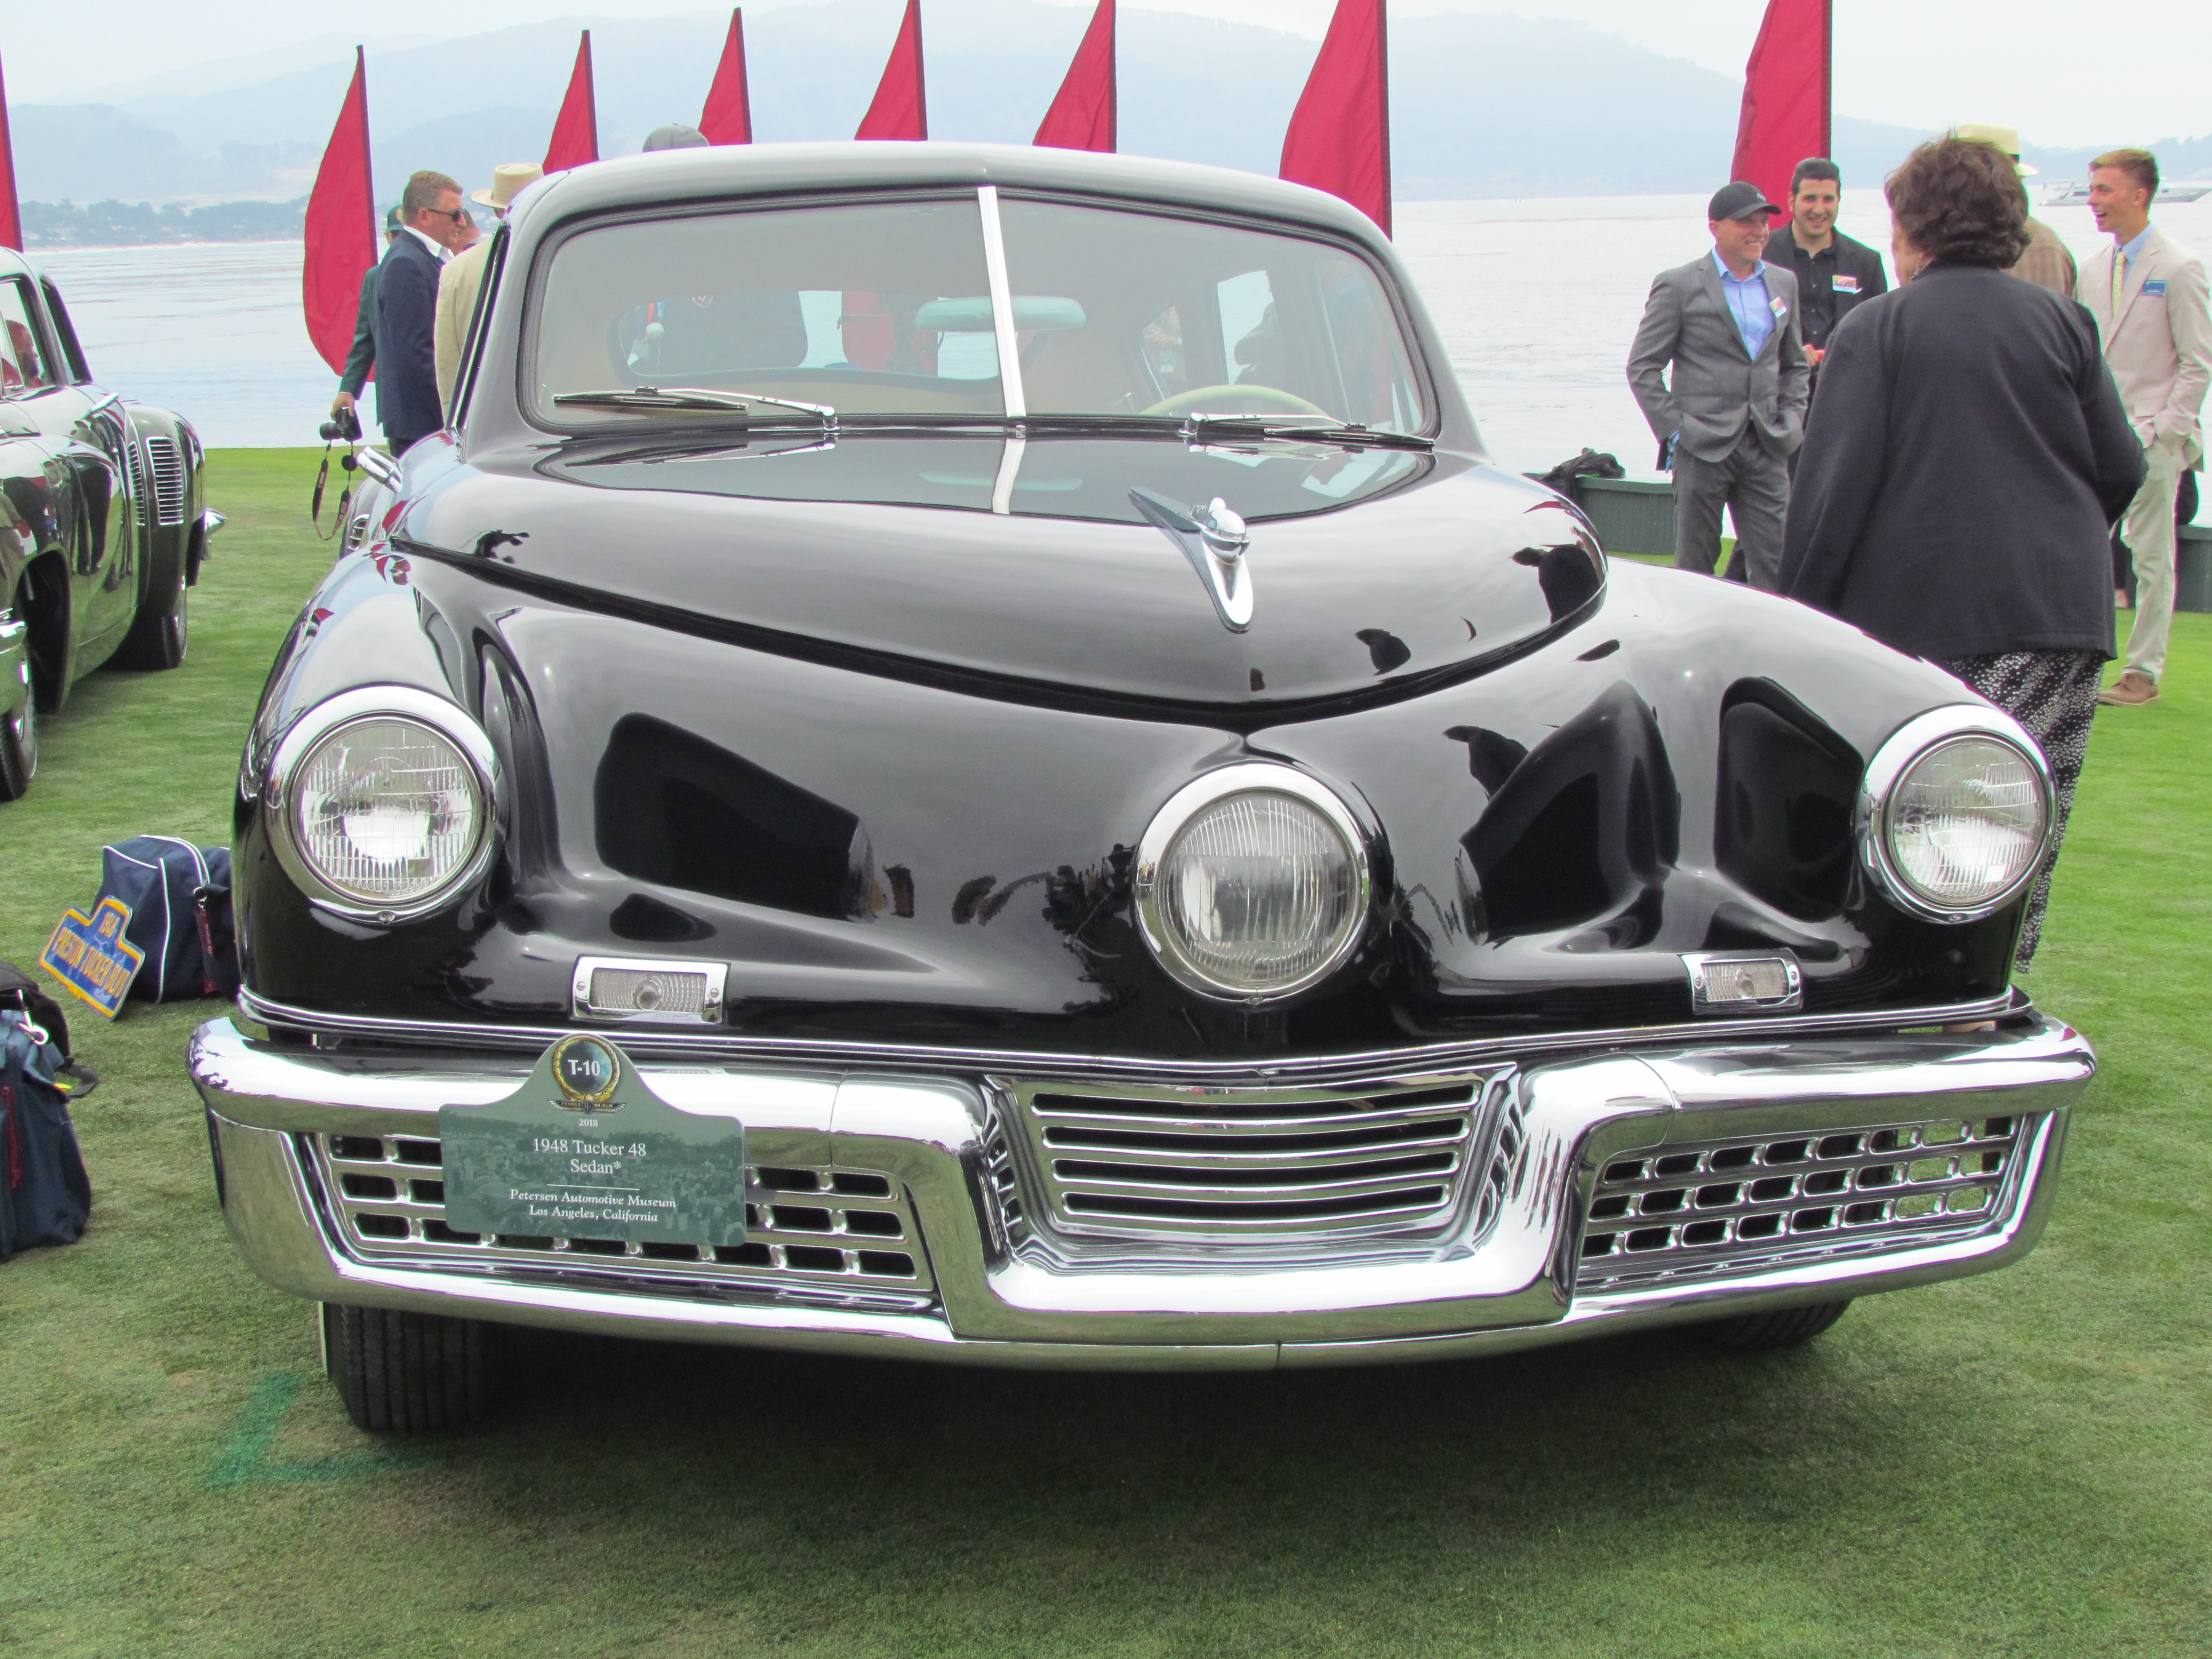 Tuckers, A trove of Tuckers at Pebble Beach, ClassicCars.com Journal